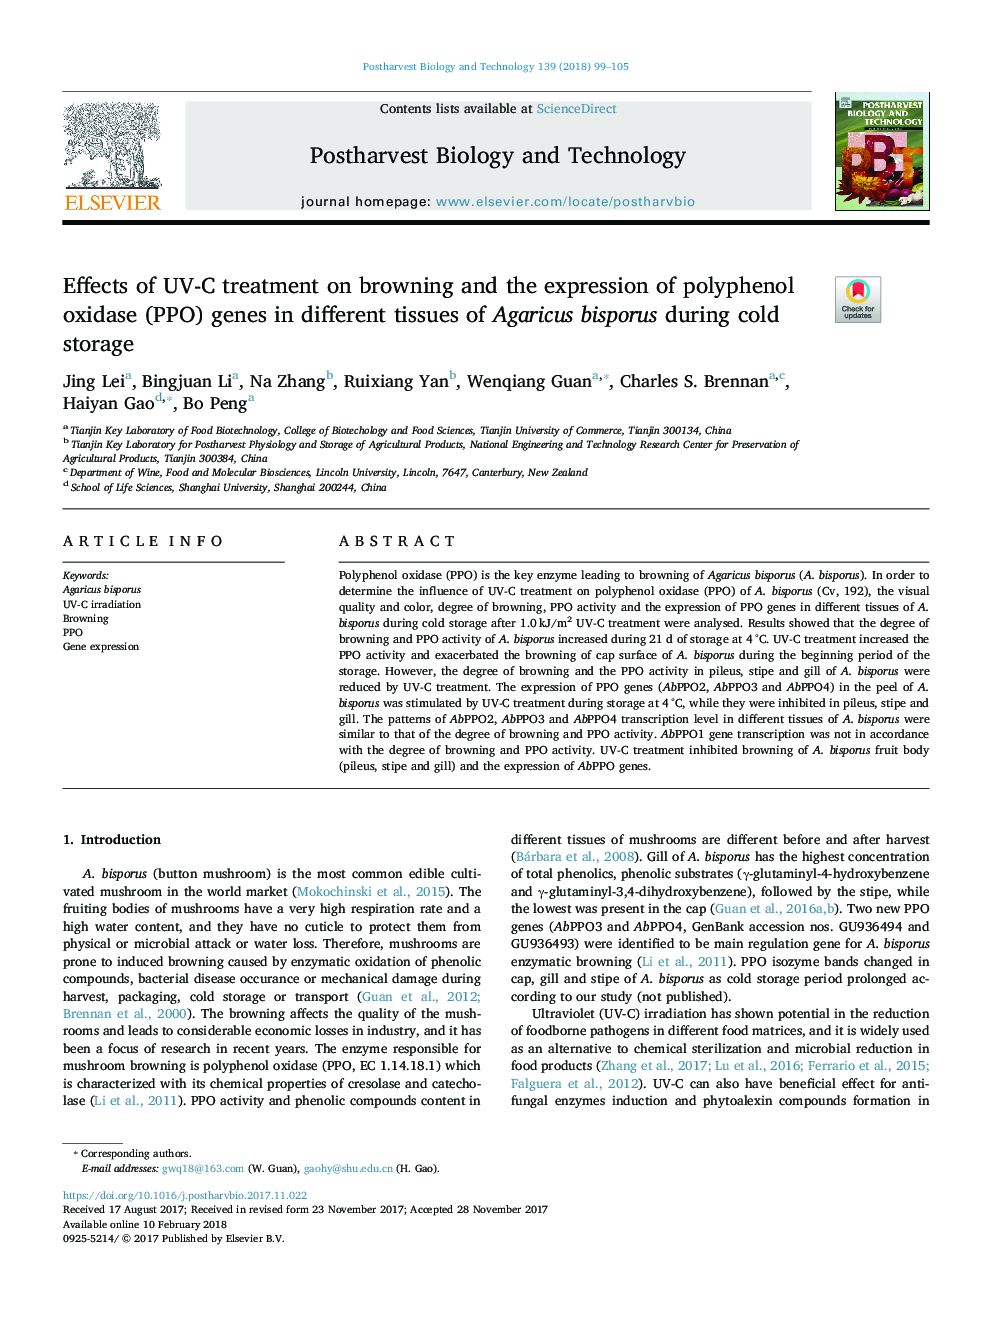 Effects of UV-C treatment on browning and the expression of polyphenol oxidase (PPO) genes in different tissues of Agaricus bisporus during cold storage